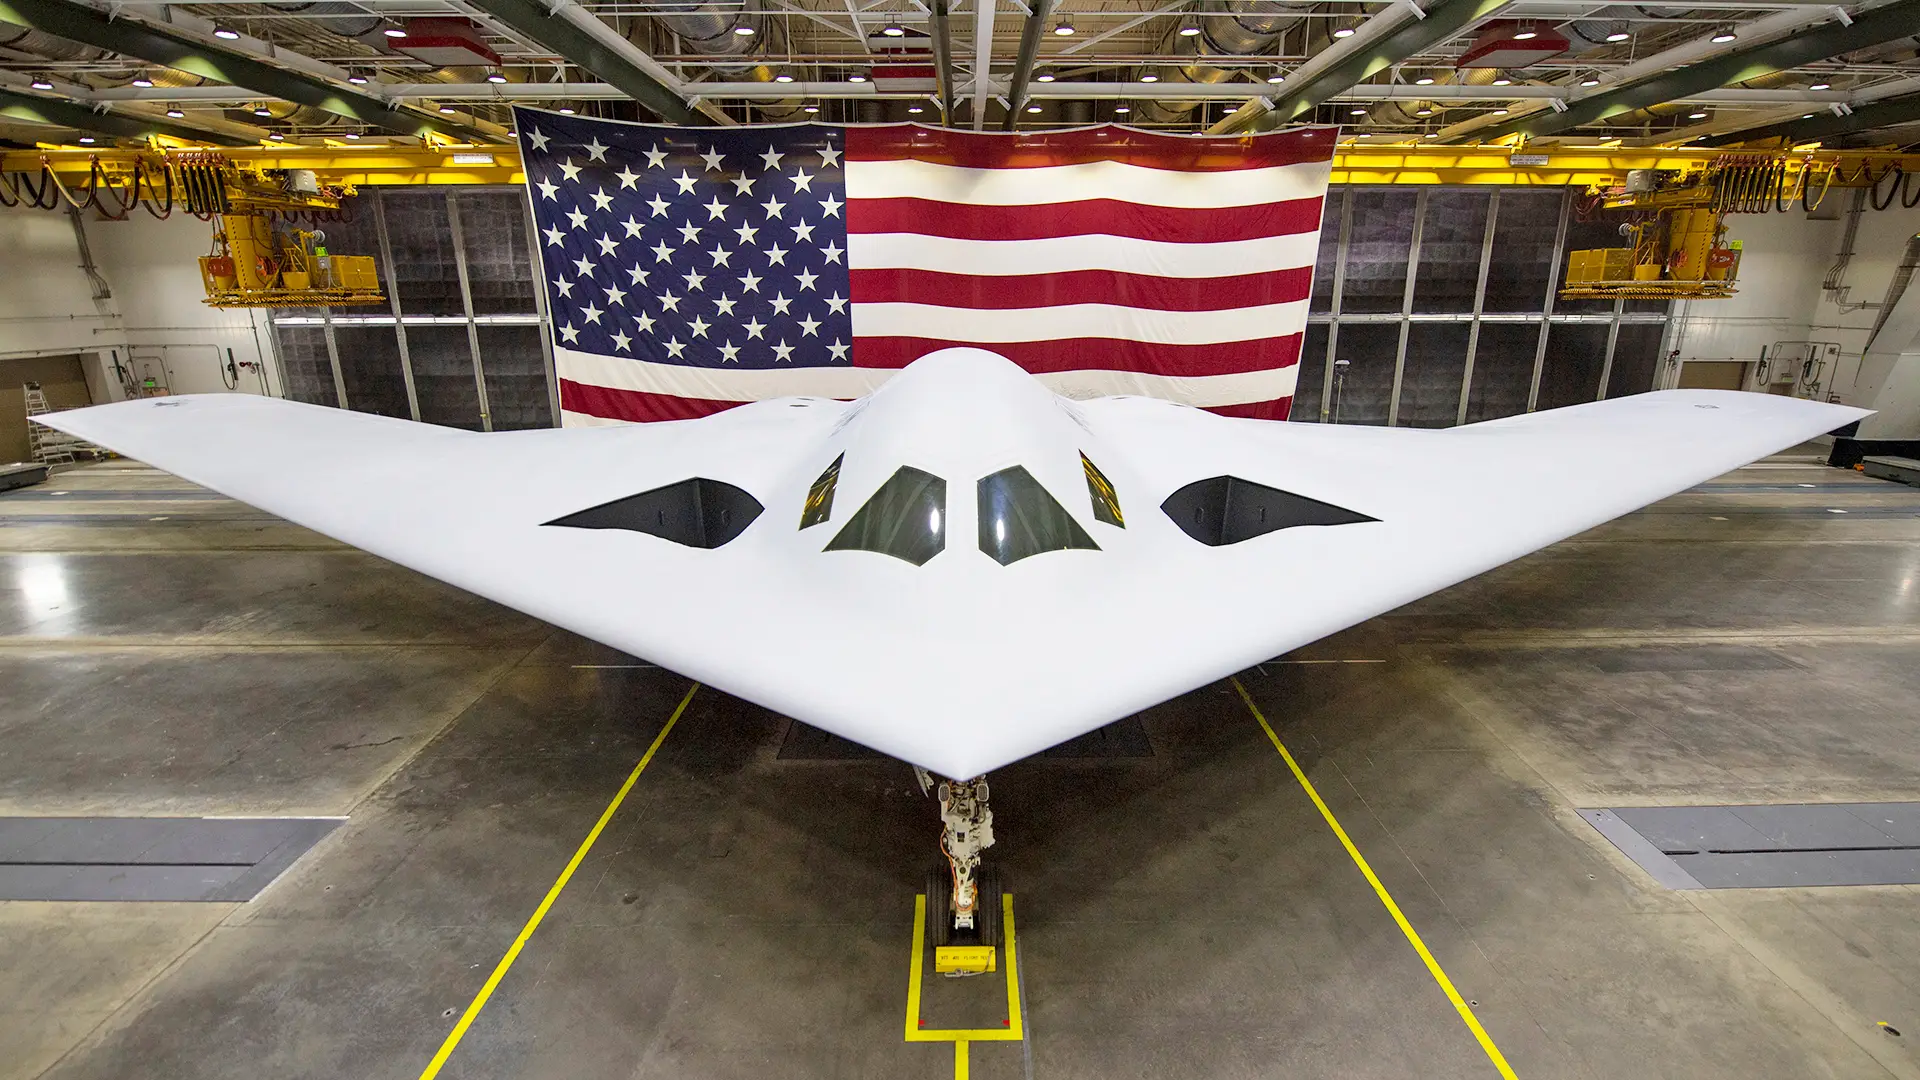 New photo of B-21 Raider reveals impressive feature of next-generation nuclear bomber